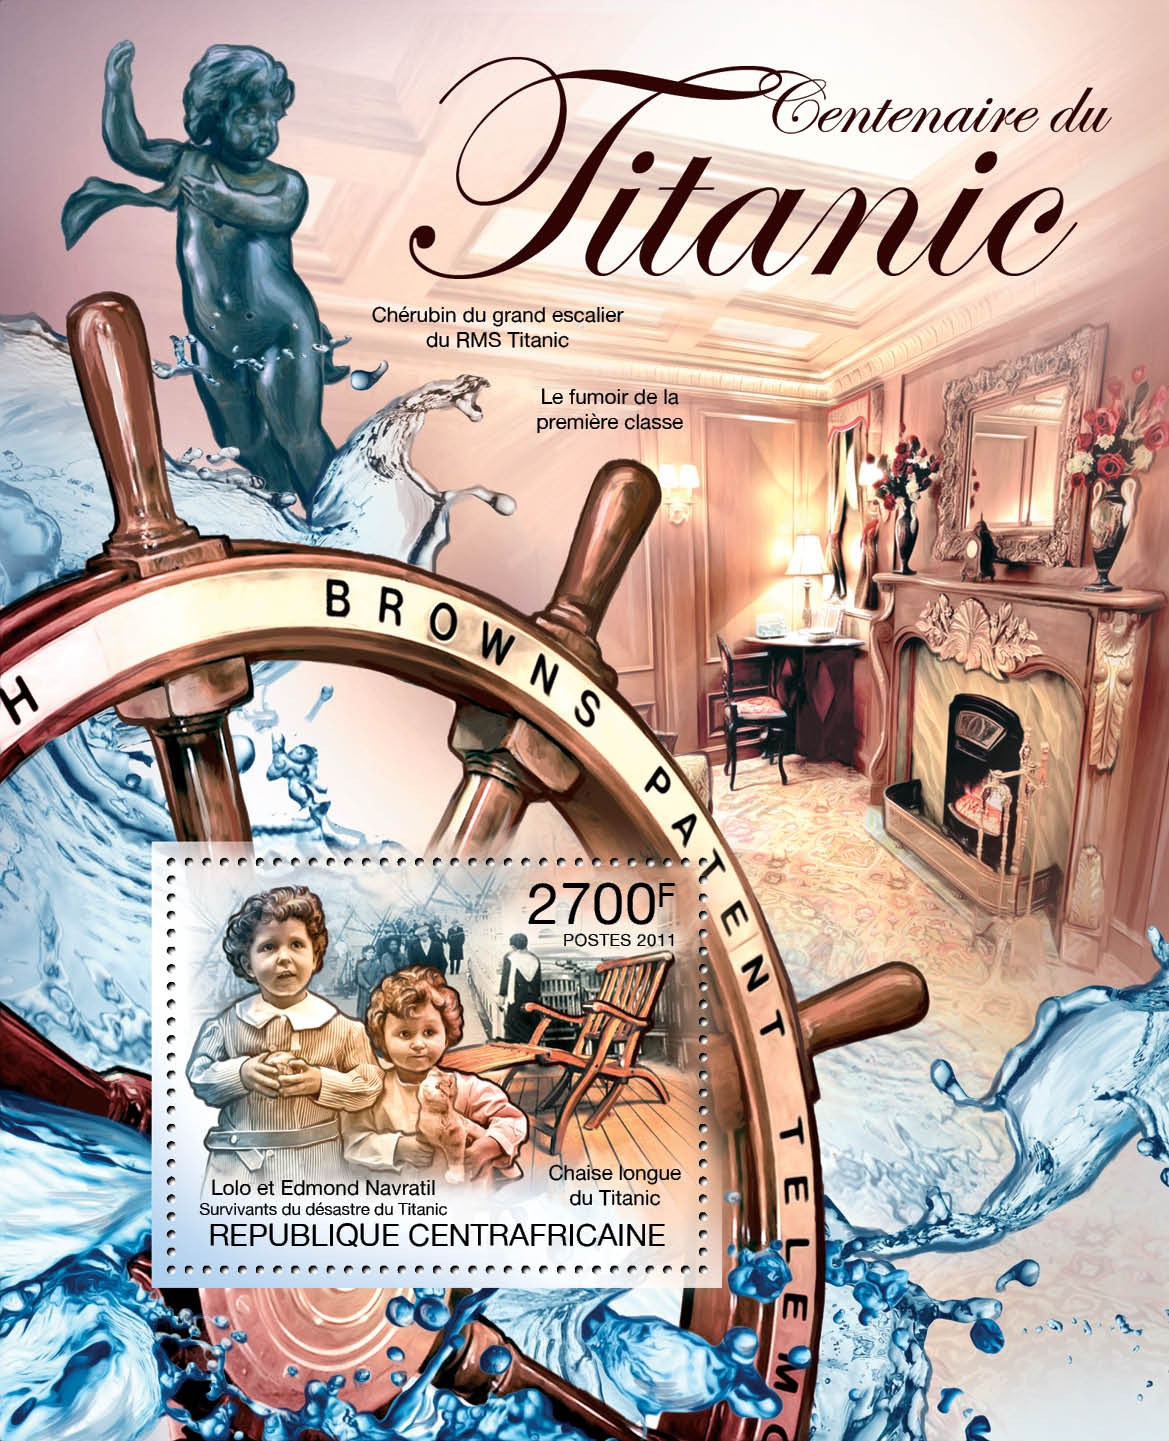 Centenary of Titanic. - Issue of Central African republic postage stamps